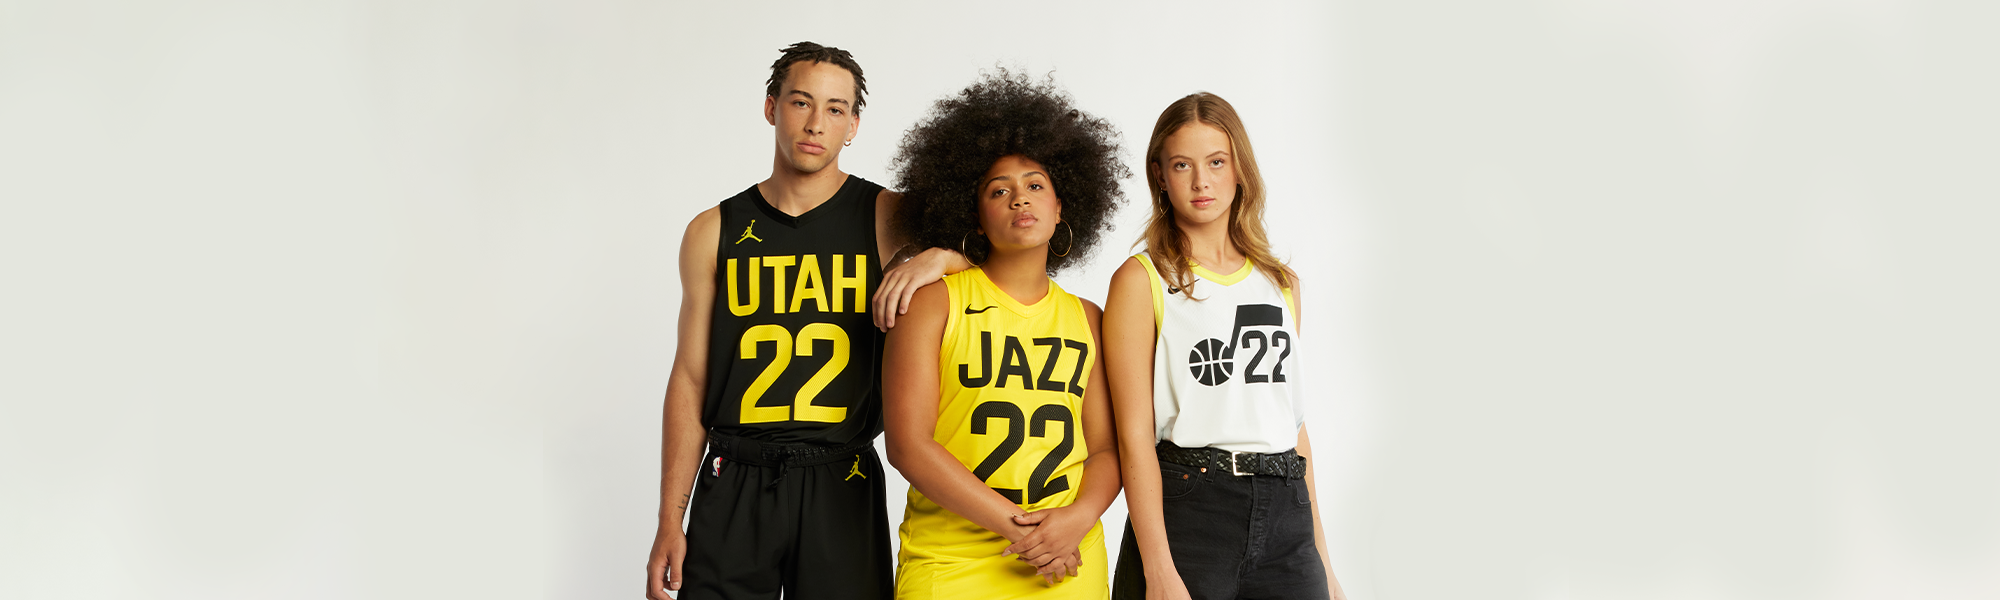 A Man and two women standing together, the man in the Black Jordan darkmode jersey, women in middle with the Yellow Nike Remix Jersey, and the other women wearing the white Nike association jersey